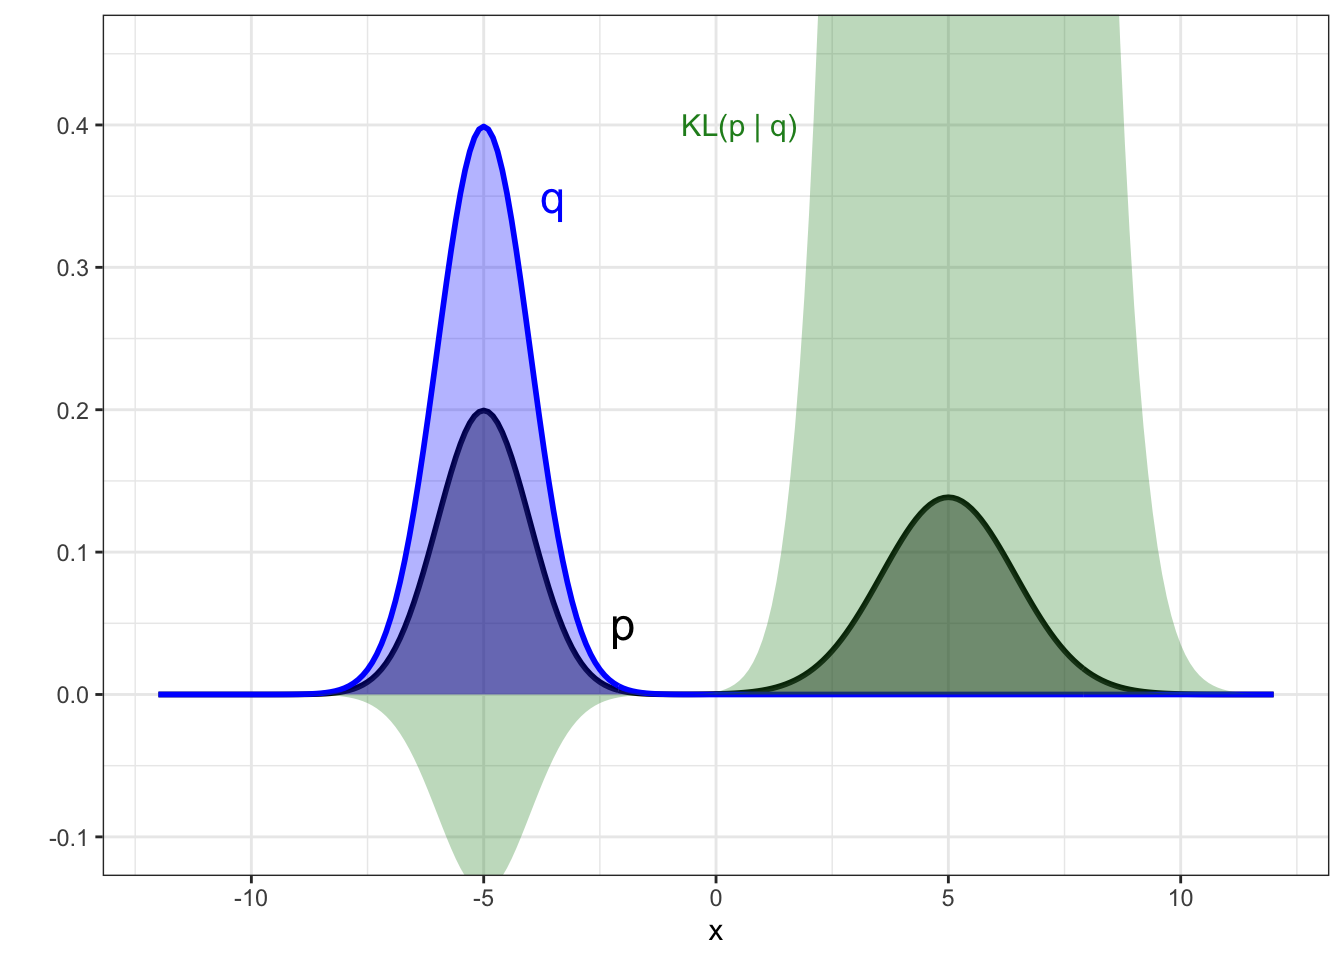 Example of the forward KL divergence when the target posterior is multi-modal. Target posterior is shown in black, and the two panels show two alternative candidate distributions from a Gaussian family (blue). The contribution to the KL divergence is shown by the green region, with the KL figure itself being the area of this region.